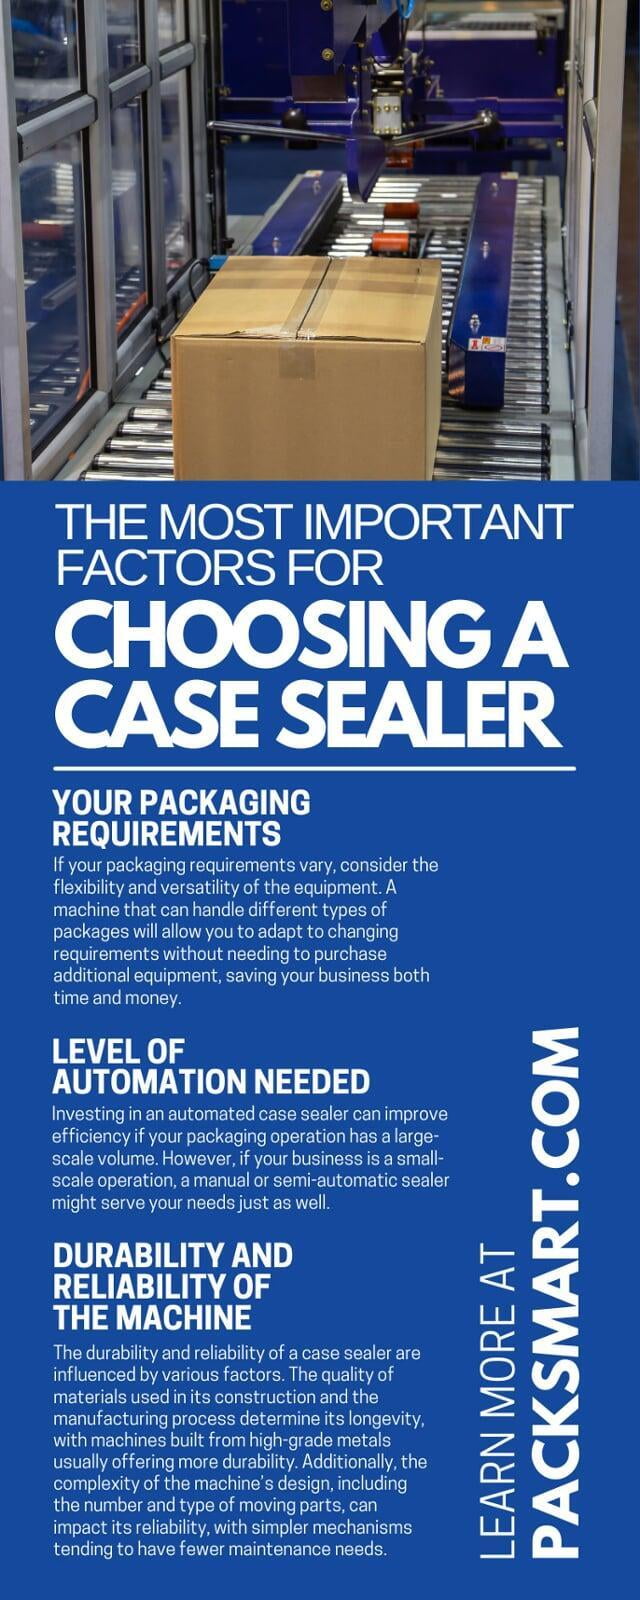 The Most Important Factors for Choosing a Case Sealer